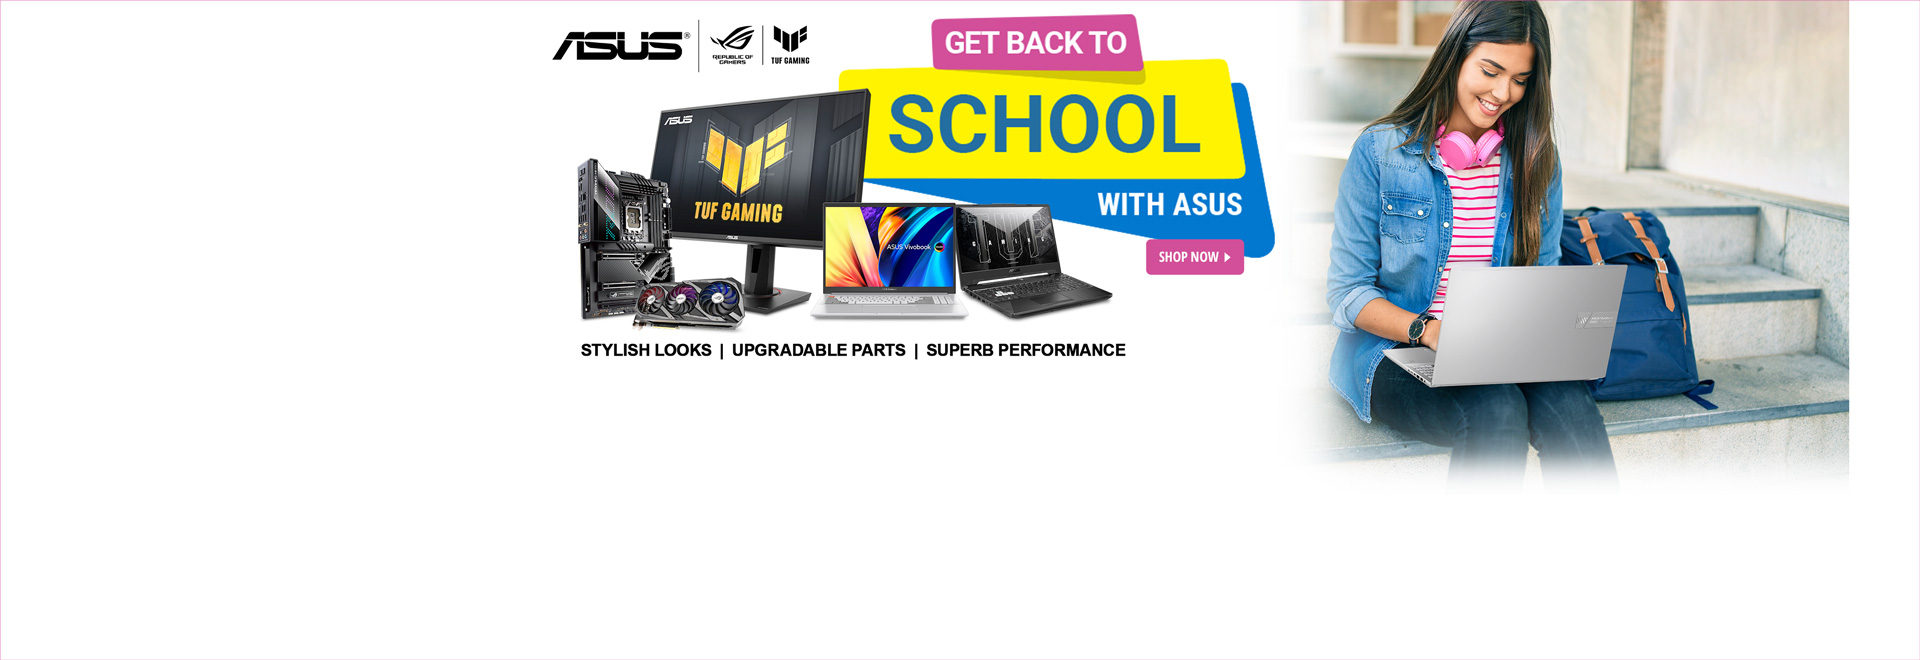 Get Back to School with ASUS